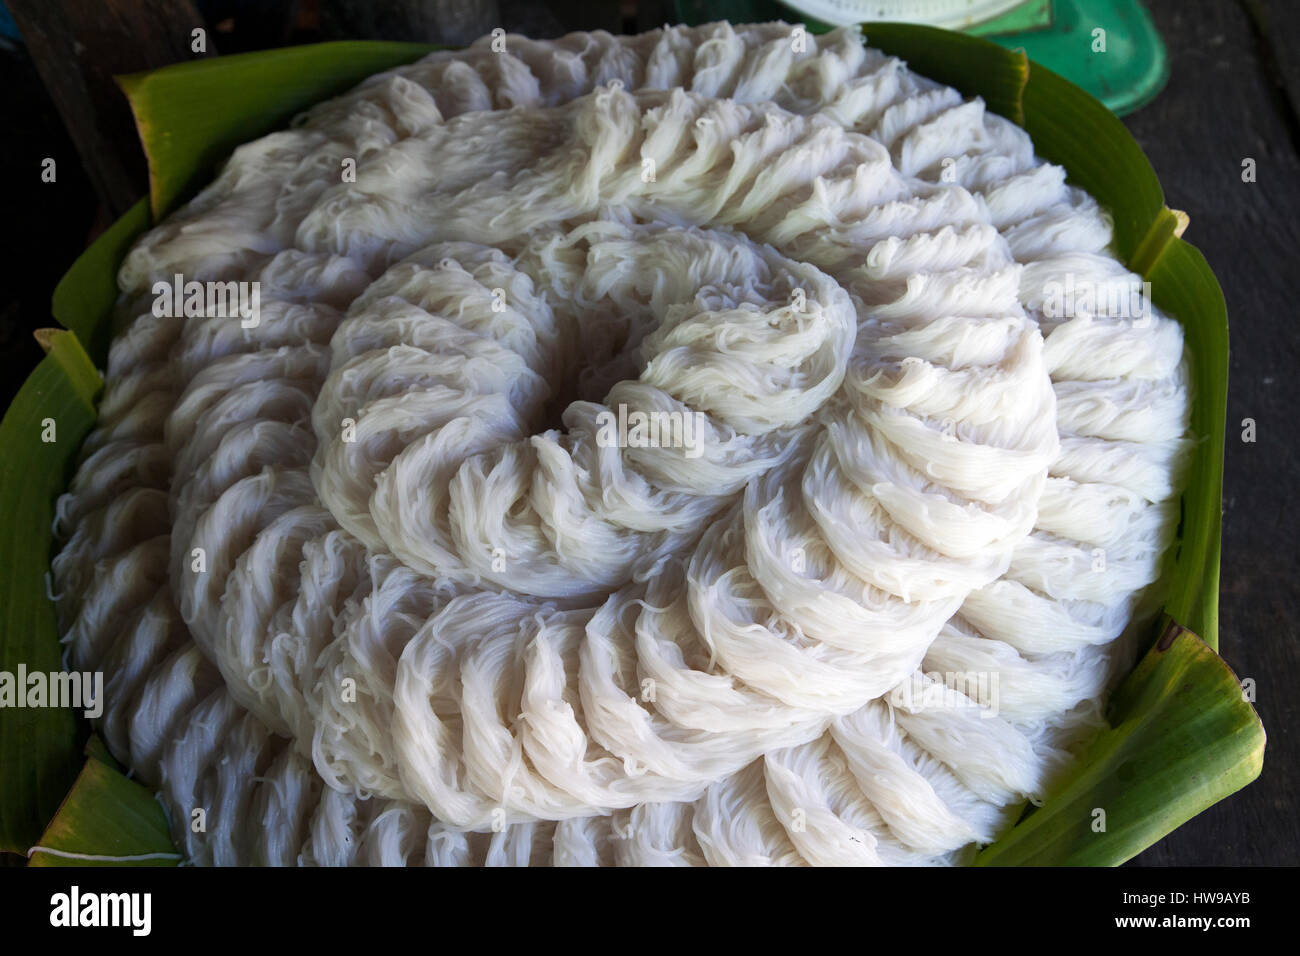 Khmer Noodles made from Rice in Preah Dak Village in Siem Reap, Cambodia Stock Photo